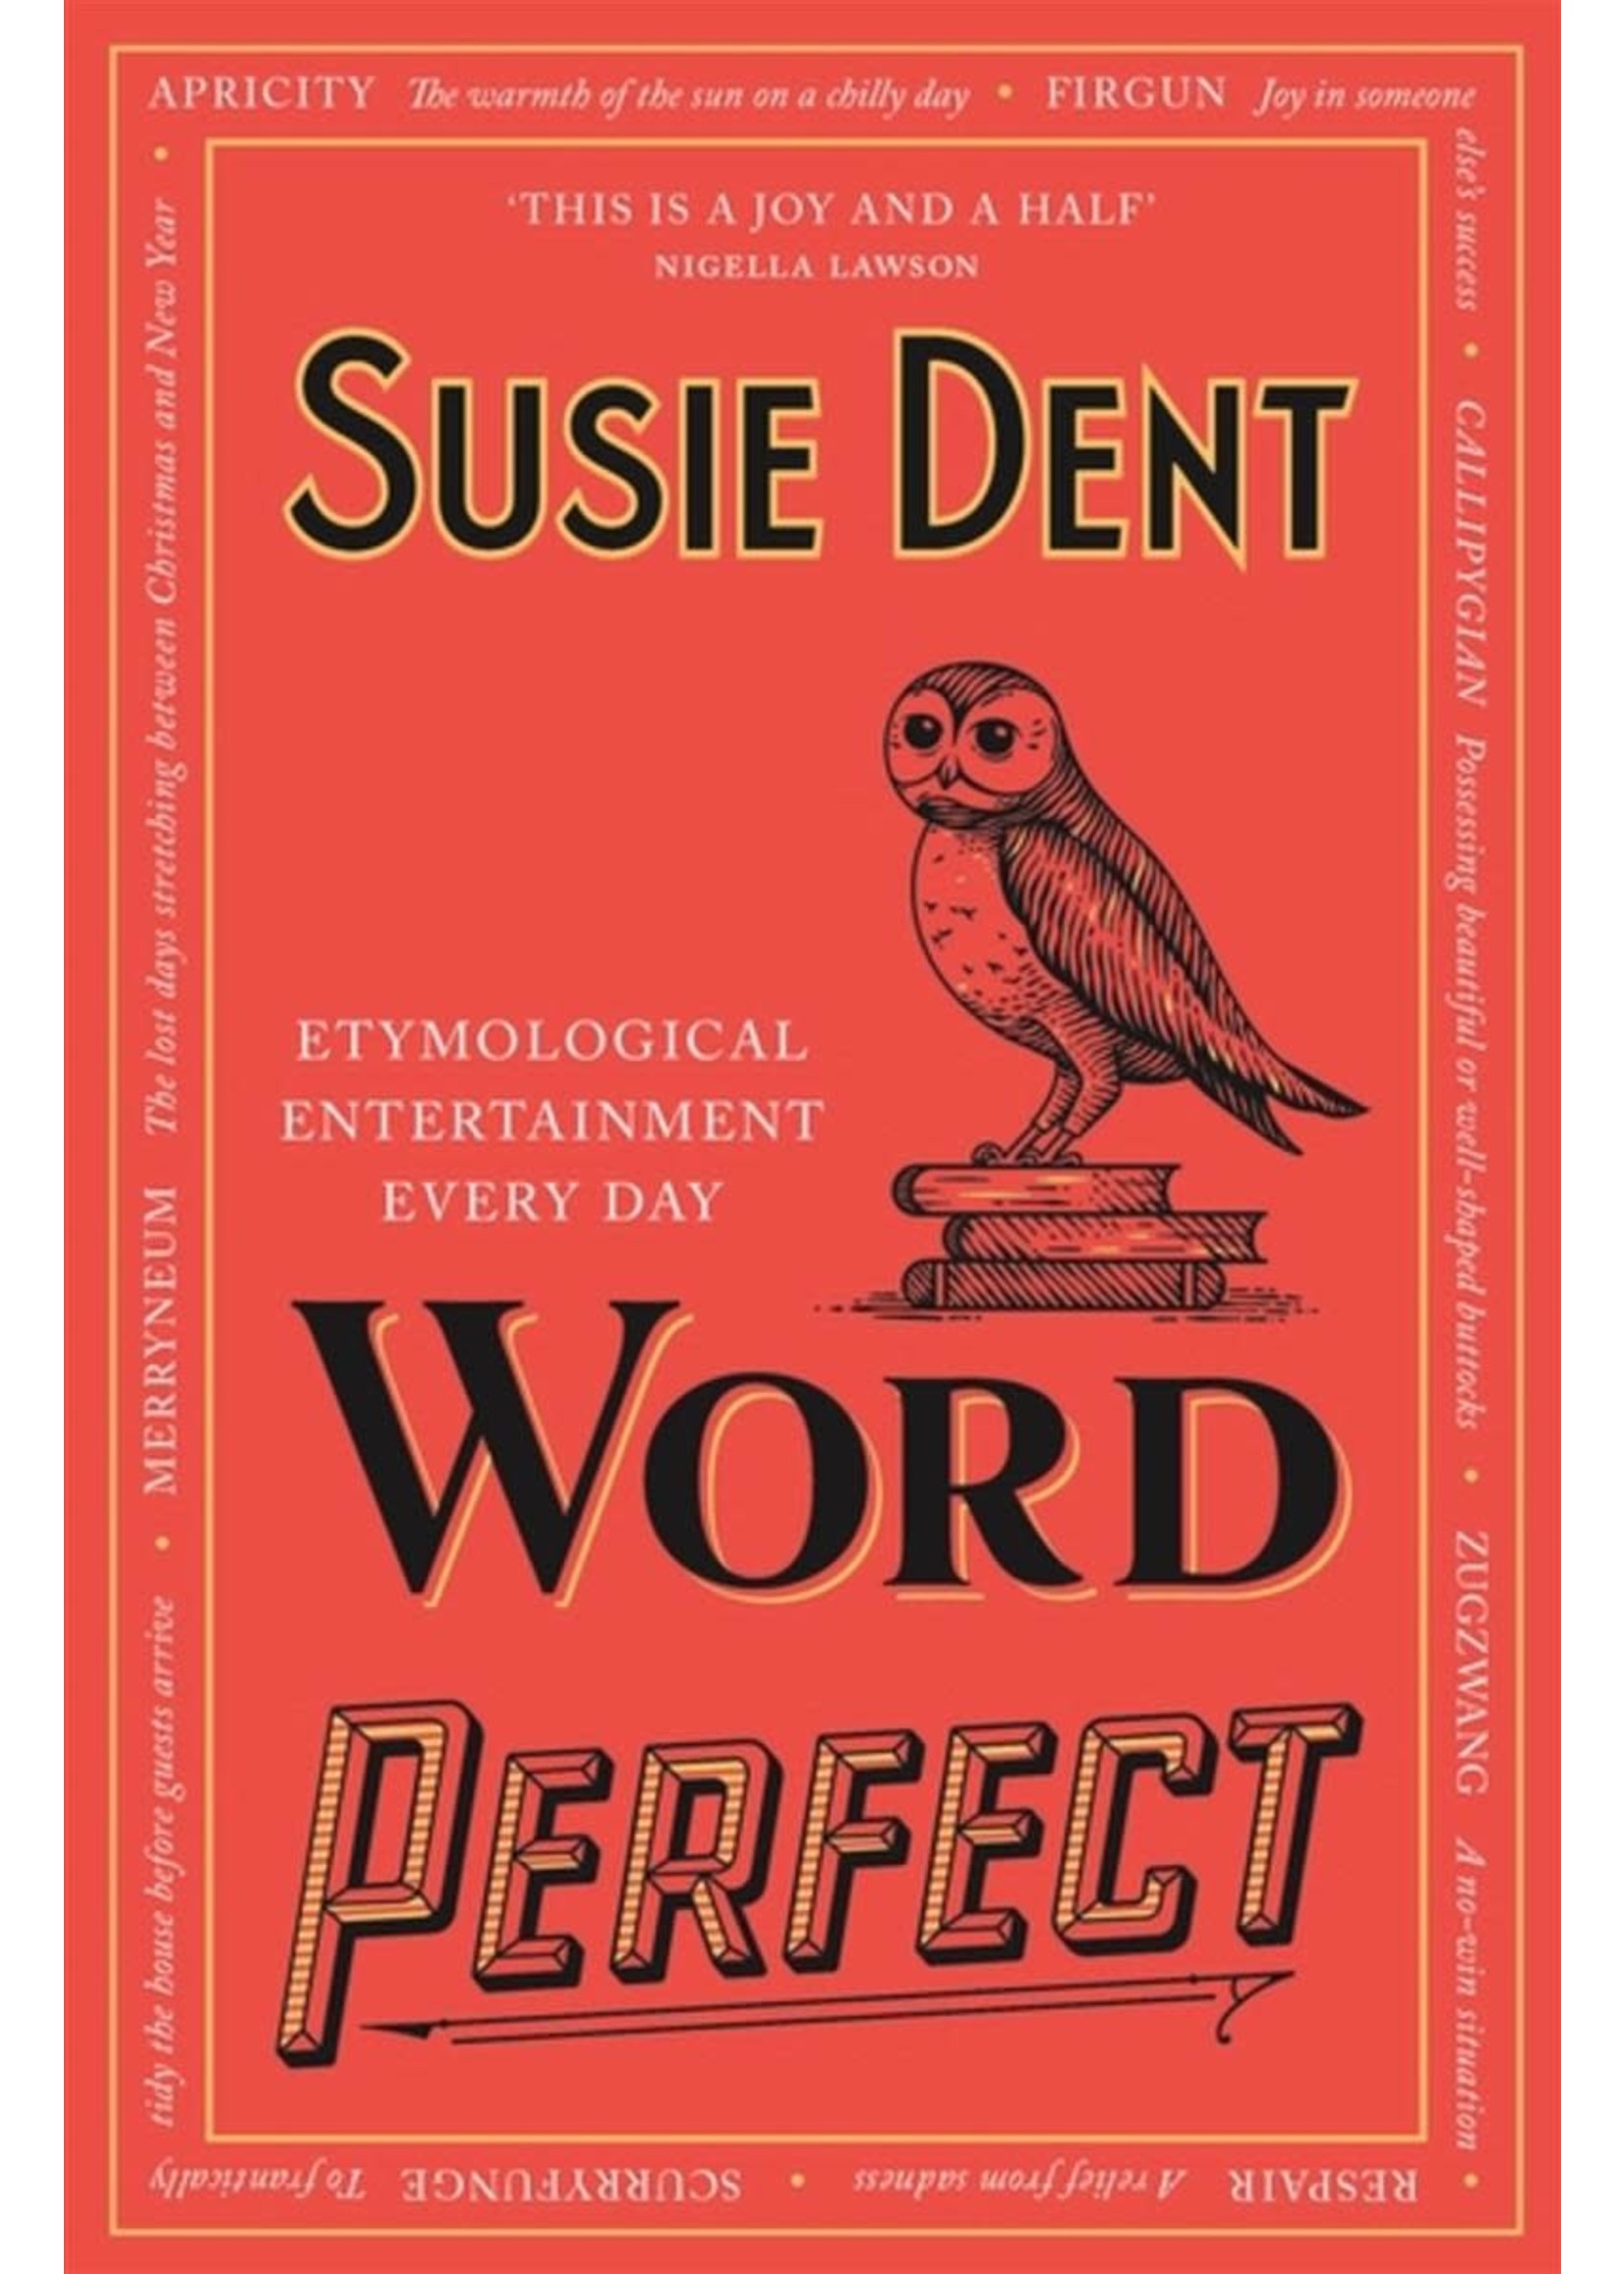 Word Perfect: Etymological Entertainment For Every Day of the Year by Susie Dent